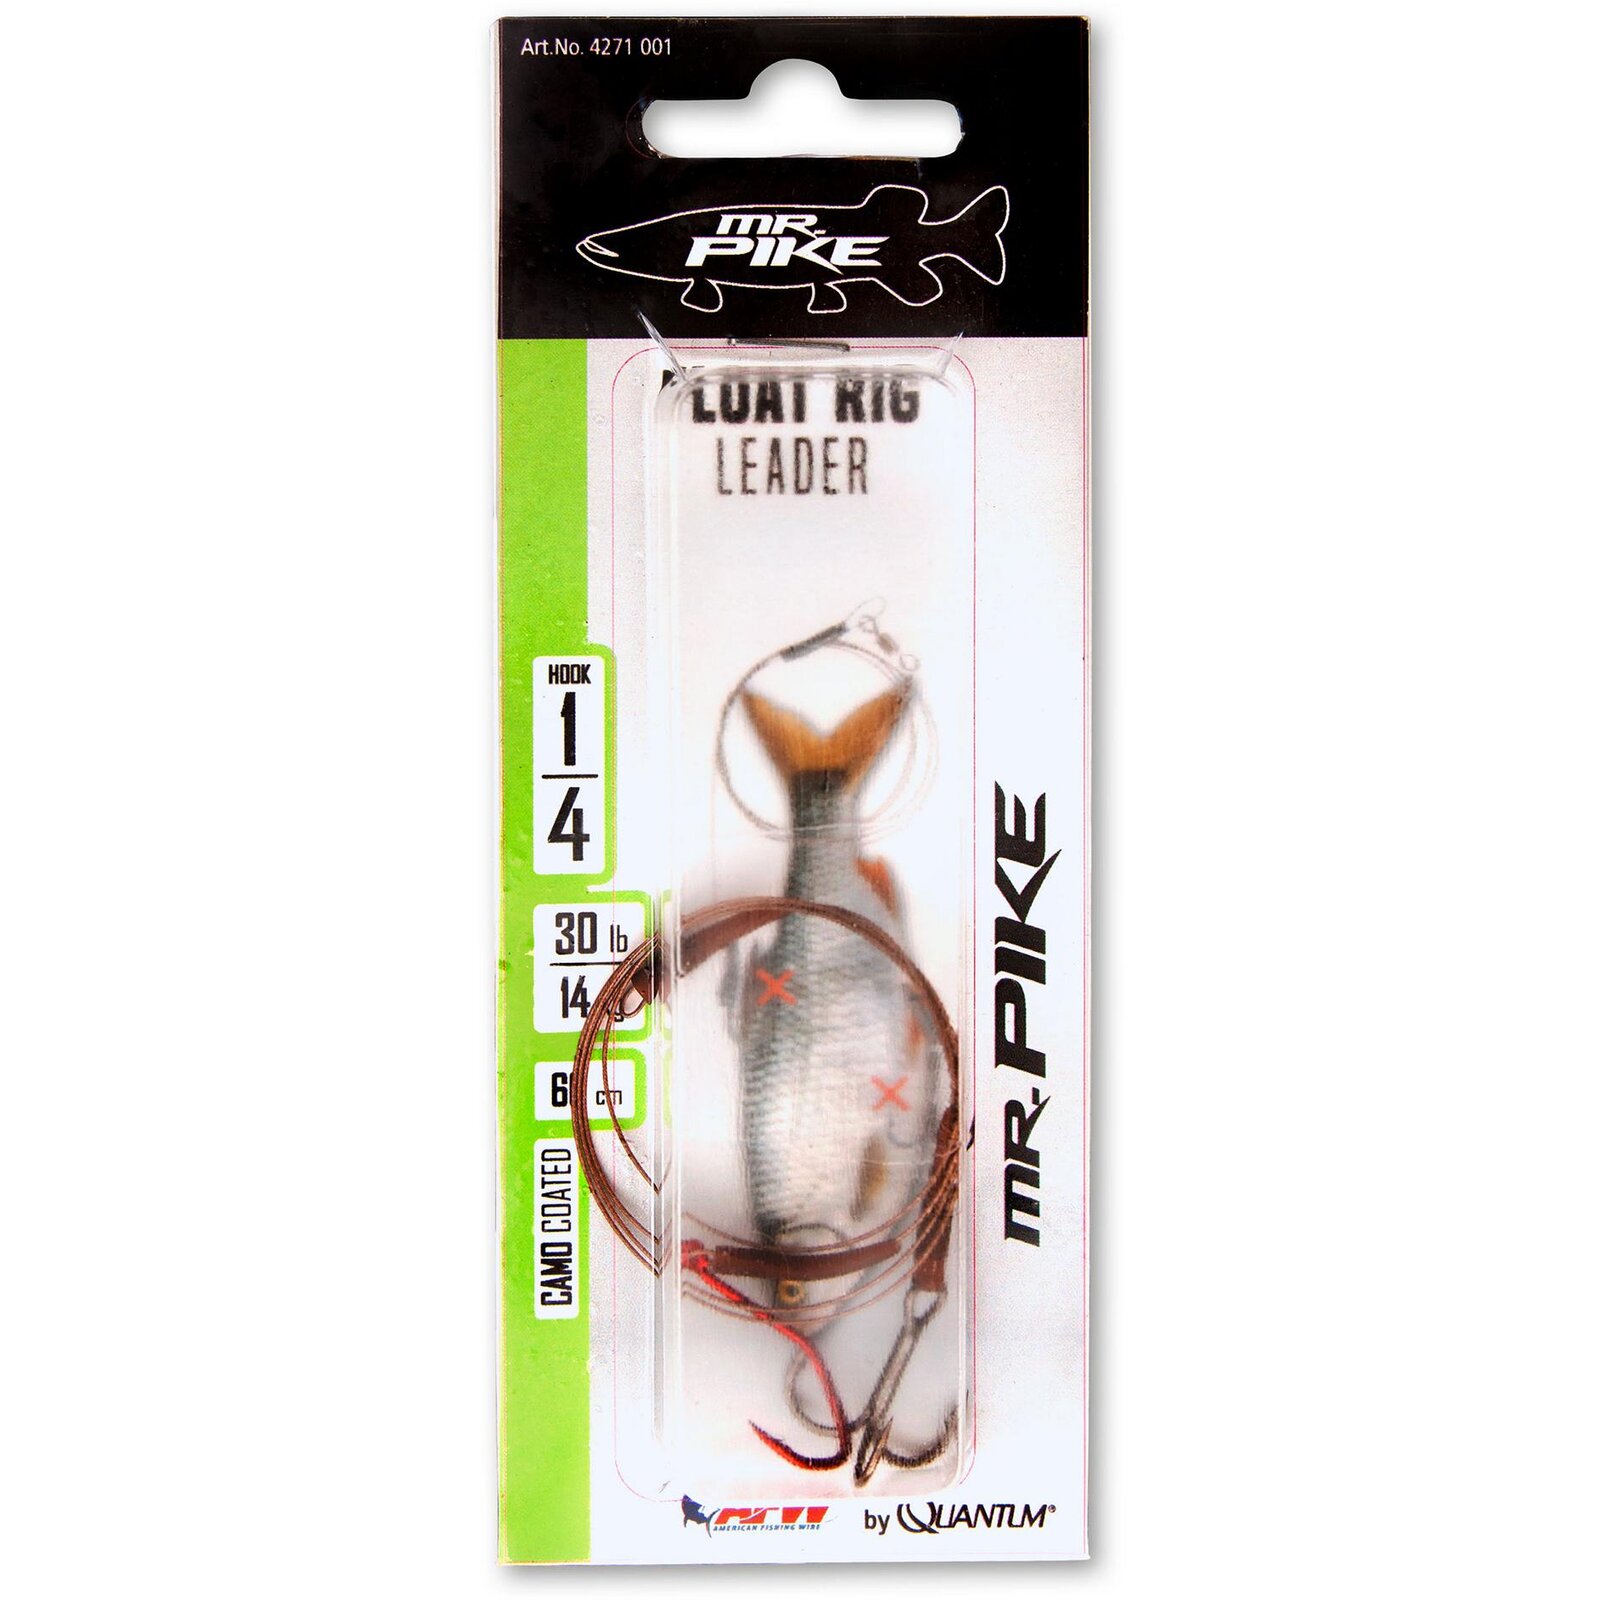 Mr. Pike #2 Float Rig Leader camou 14kg,30lbs